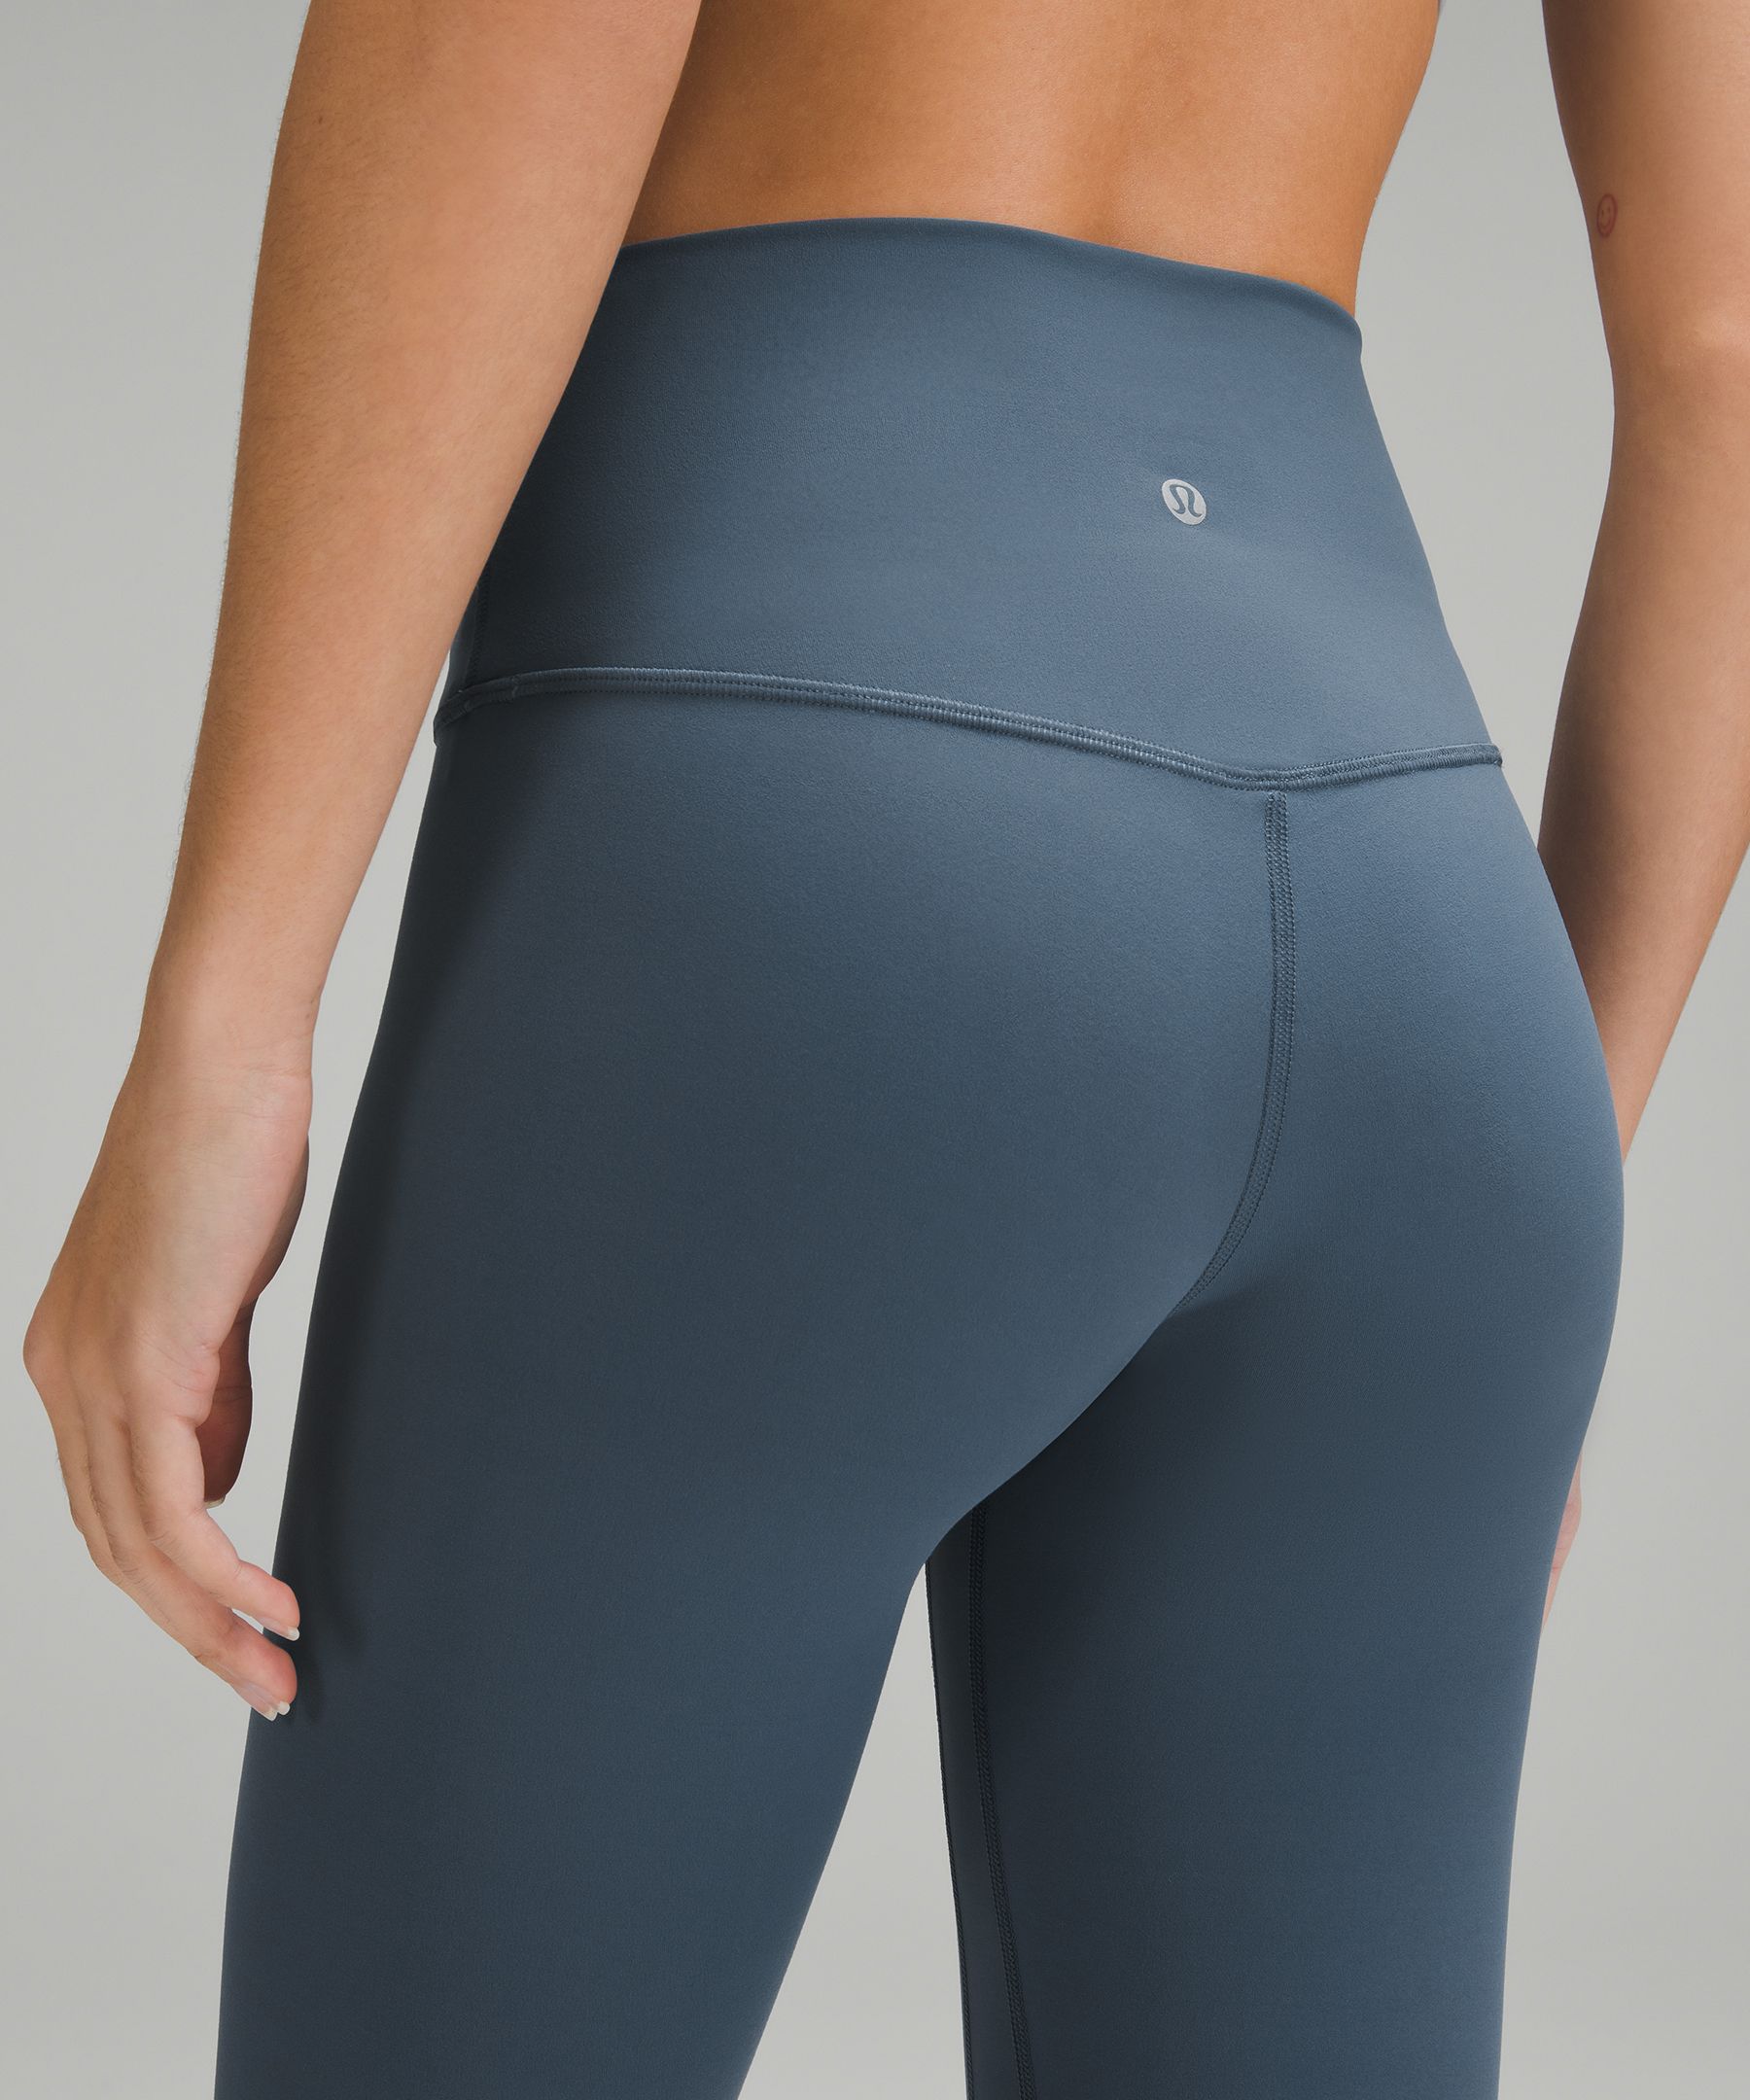 Lululemon Sonic Pink Align Leggings Size 4 - $67 - From Addy